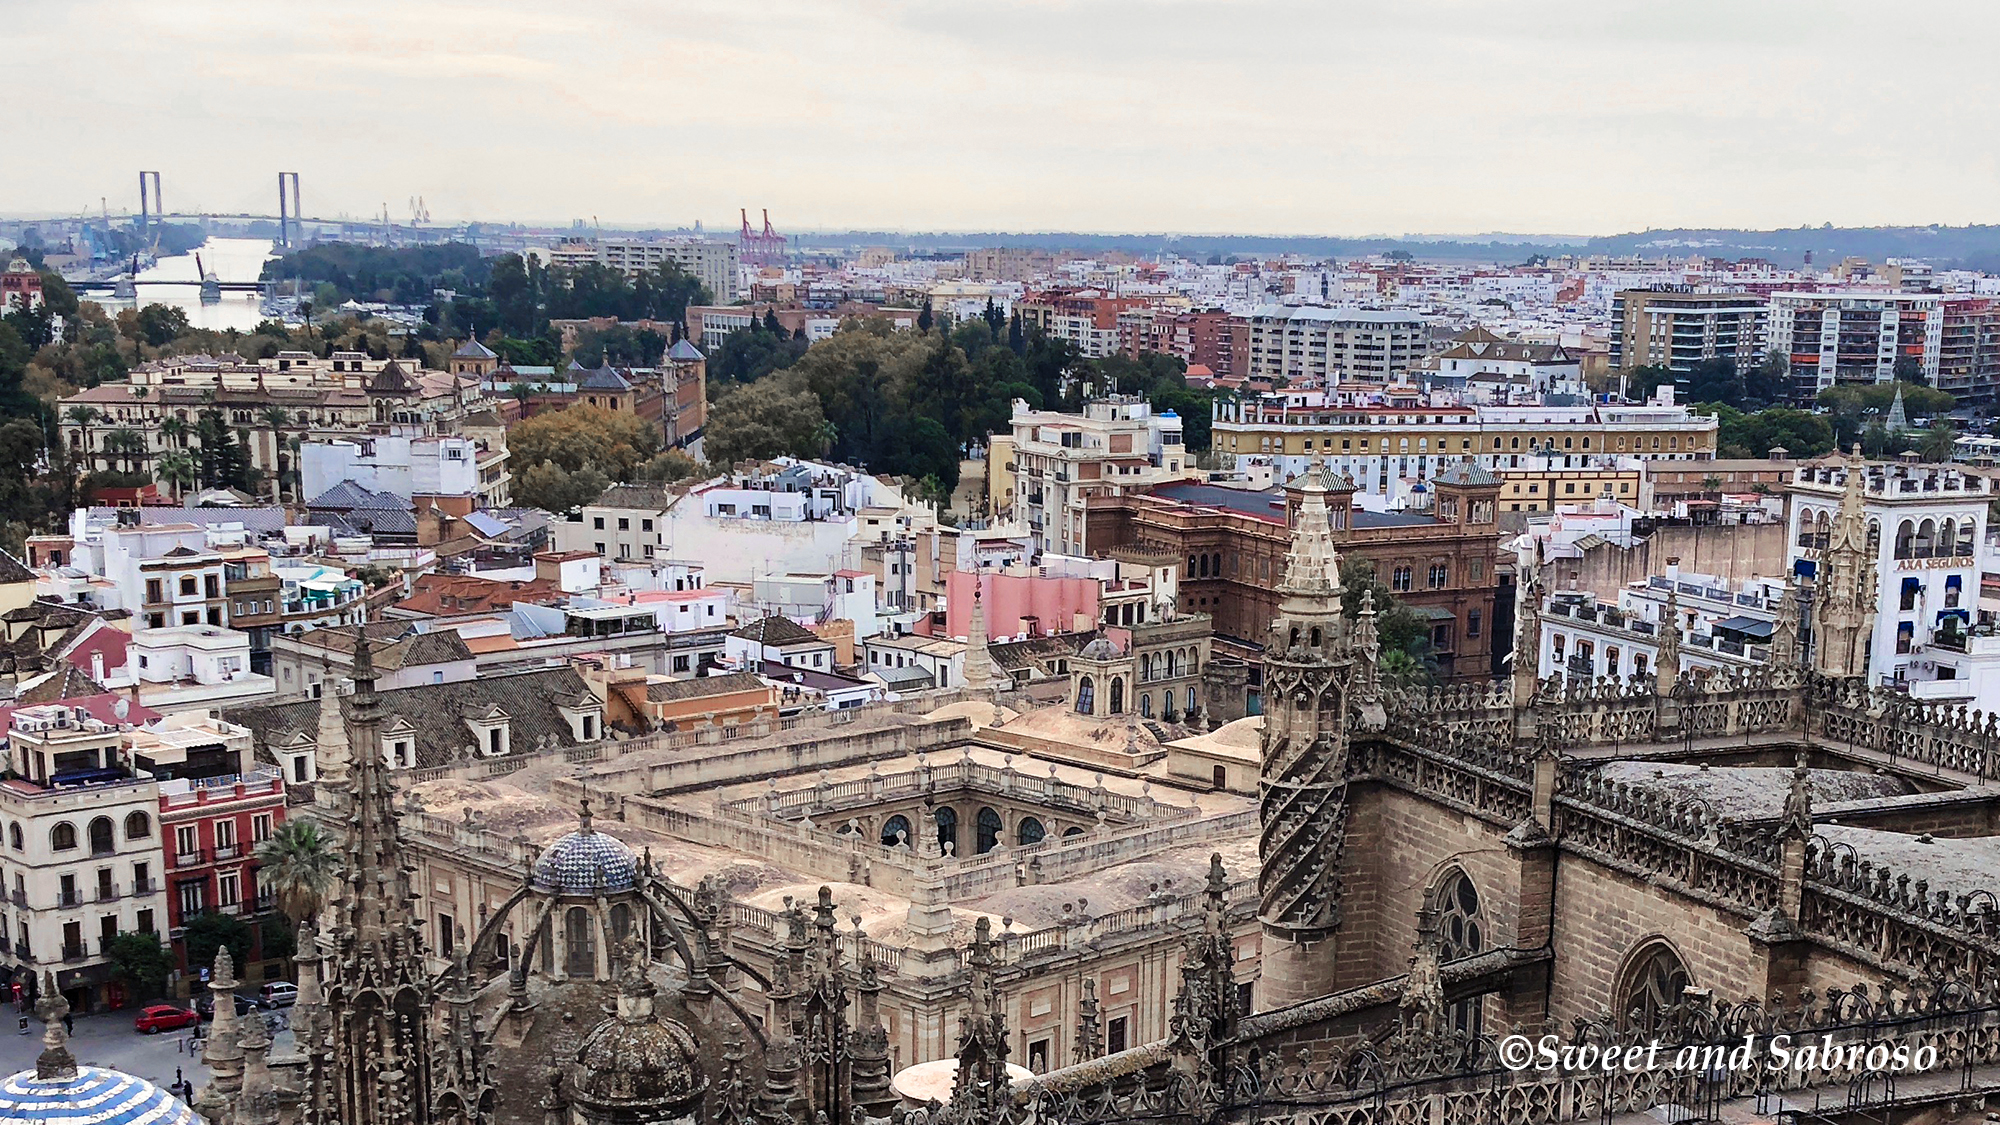 View of the city of Seville from the top of the Giralda bell tower